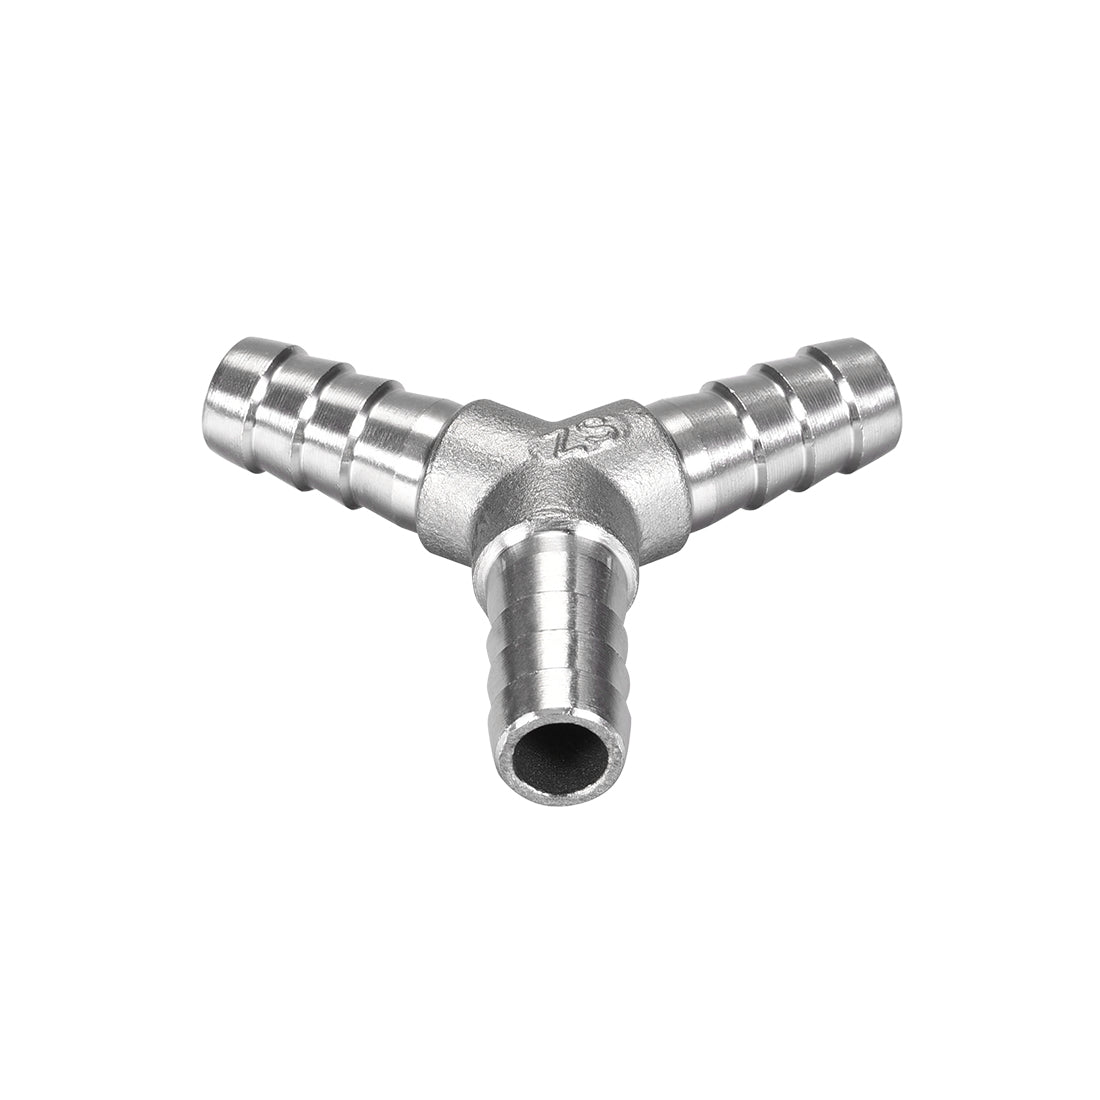 uxcell Uxcell 15/32-Inch (12mm) Hose ID Barb Fitting Stainless Steel 3 Way Y Shaped Union Home Brew Fitting